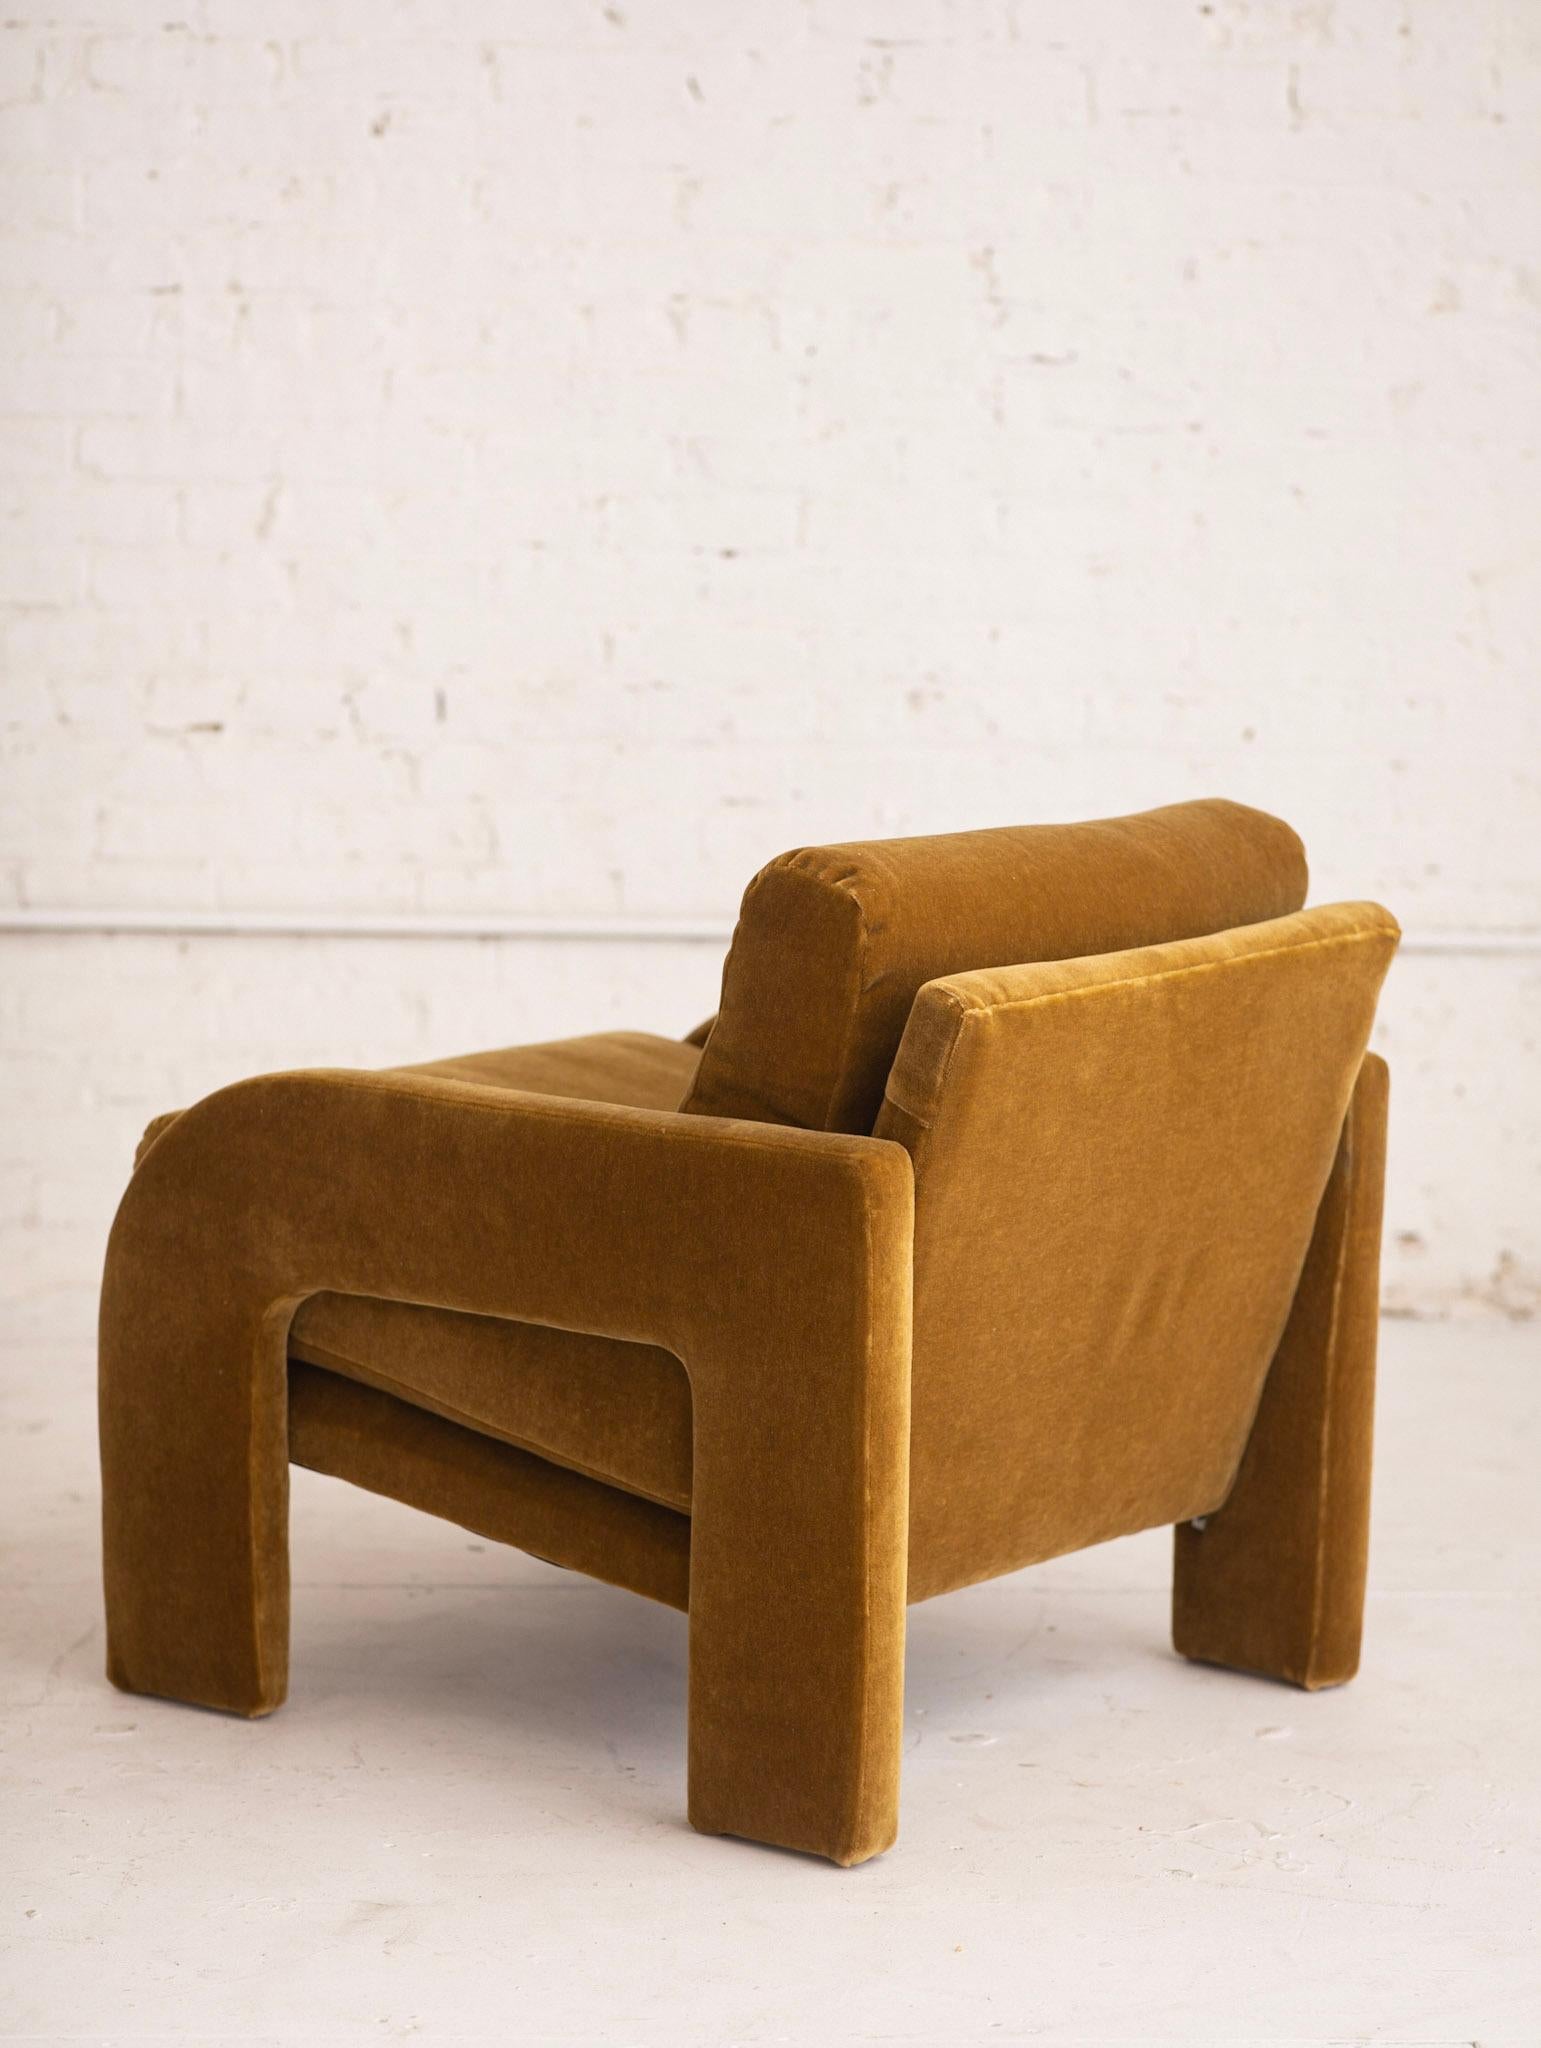 1980s Postmodern Architectural Armchair in Camel Mohair 1